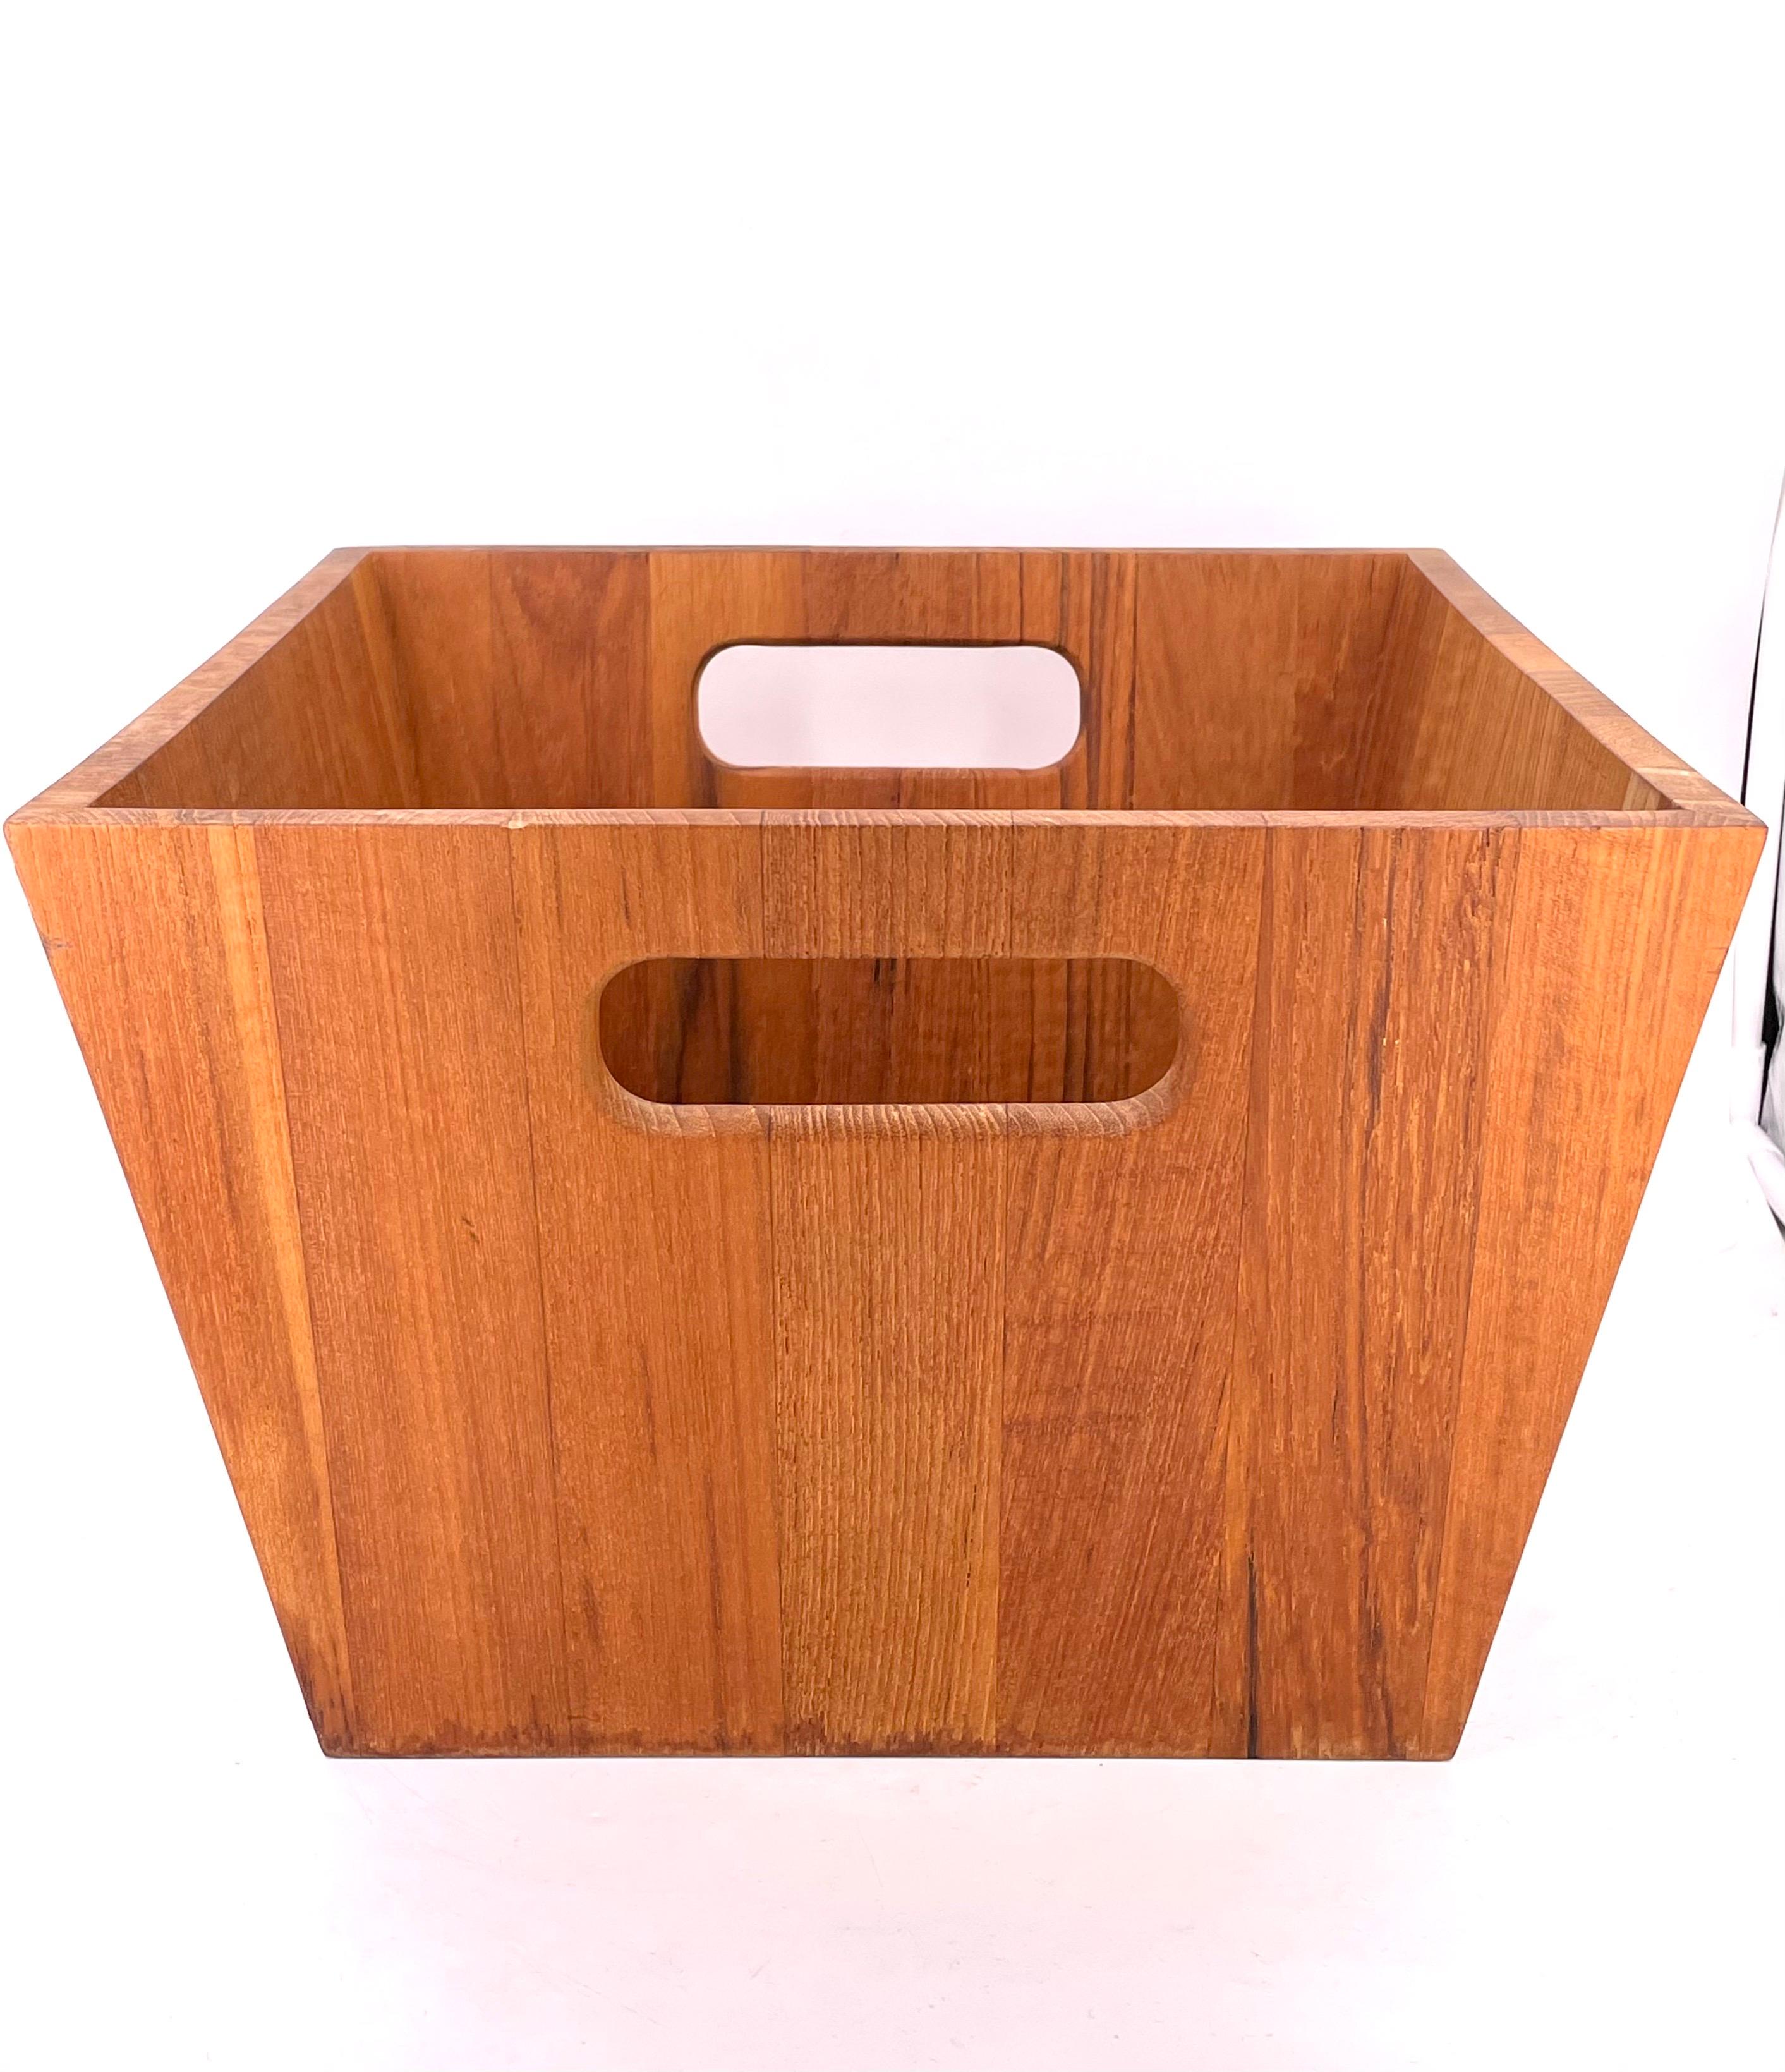 Versatile Danish modern solid teak waste basket nice original vintage condition, well constructed we have oiled and cleaned the piece.